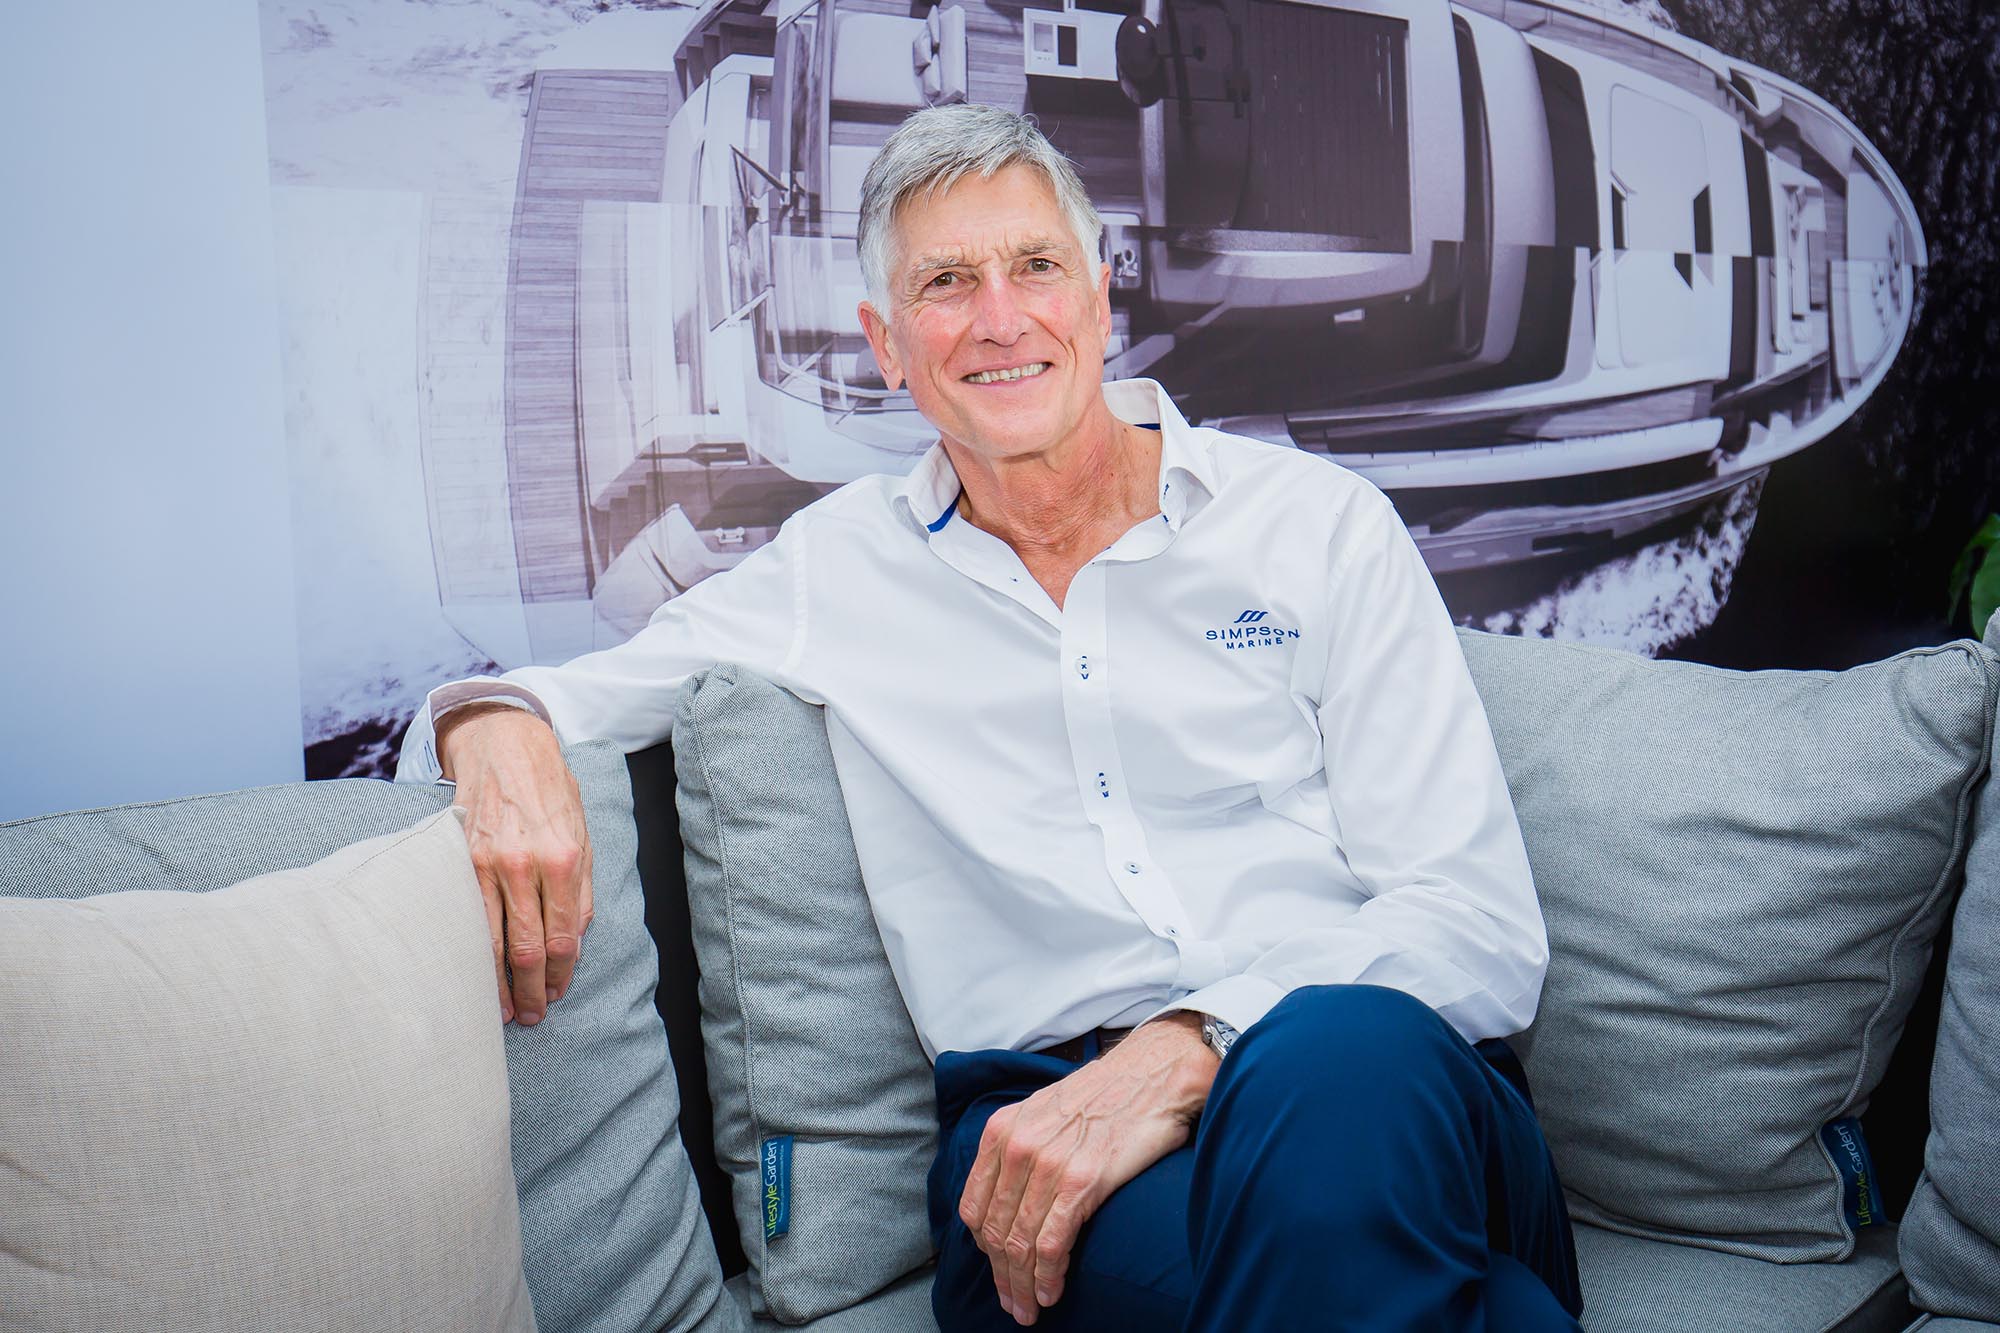 Mike Simpson, Founder and Managing Director of Simpson Marine Group